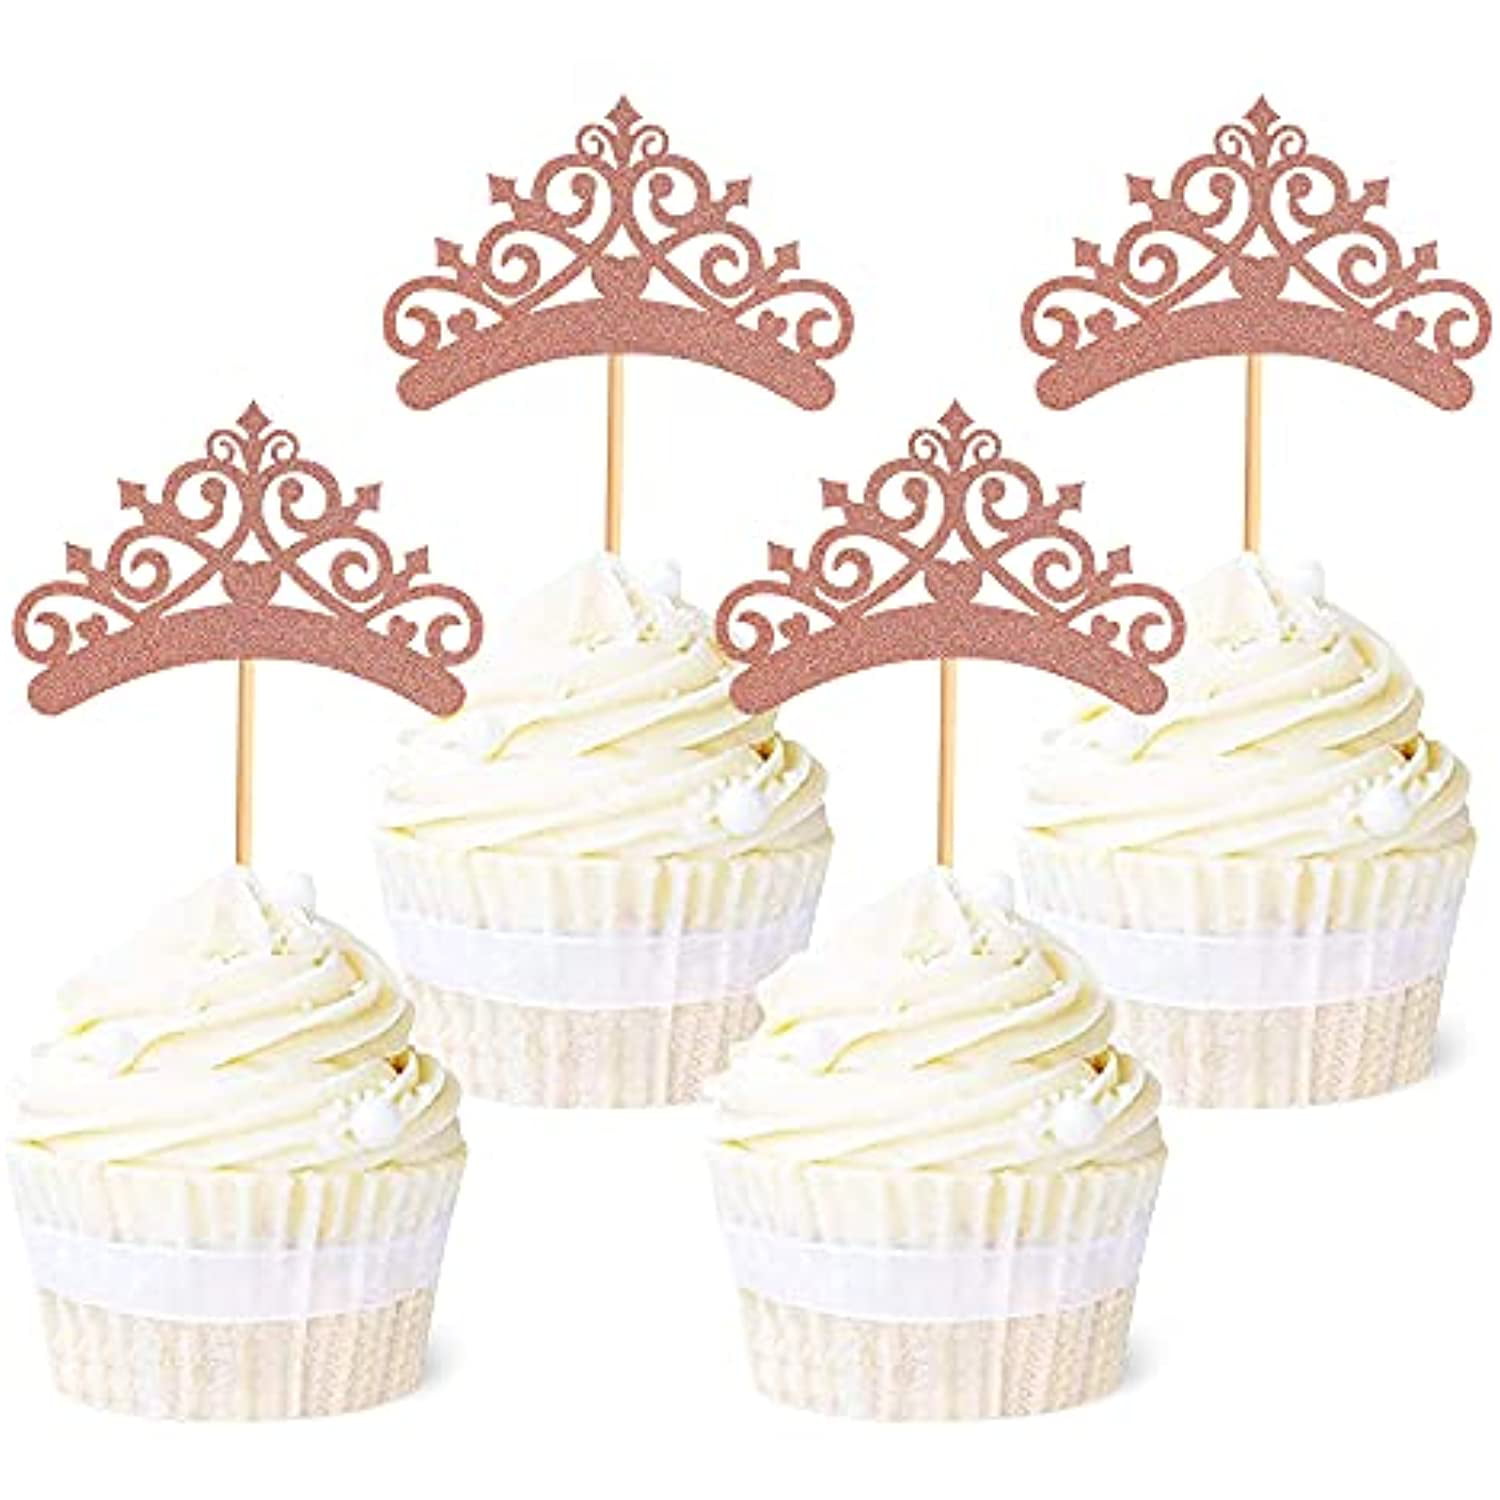 Gold Glitter Princess Crown Tiara Cake Cupcake Toppers Picks for Wedding Birthday Baby Shower Kids Party Decorations 24 PCS 